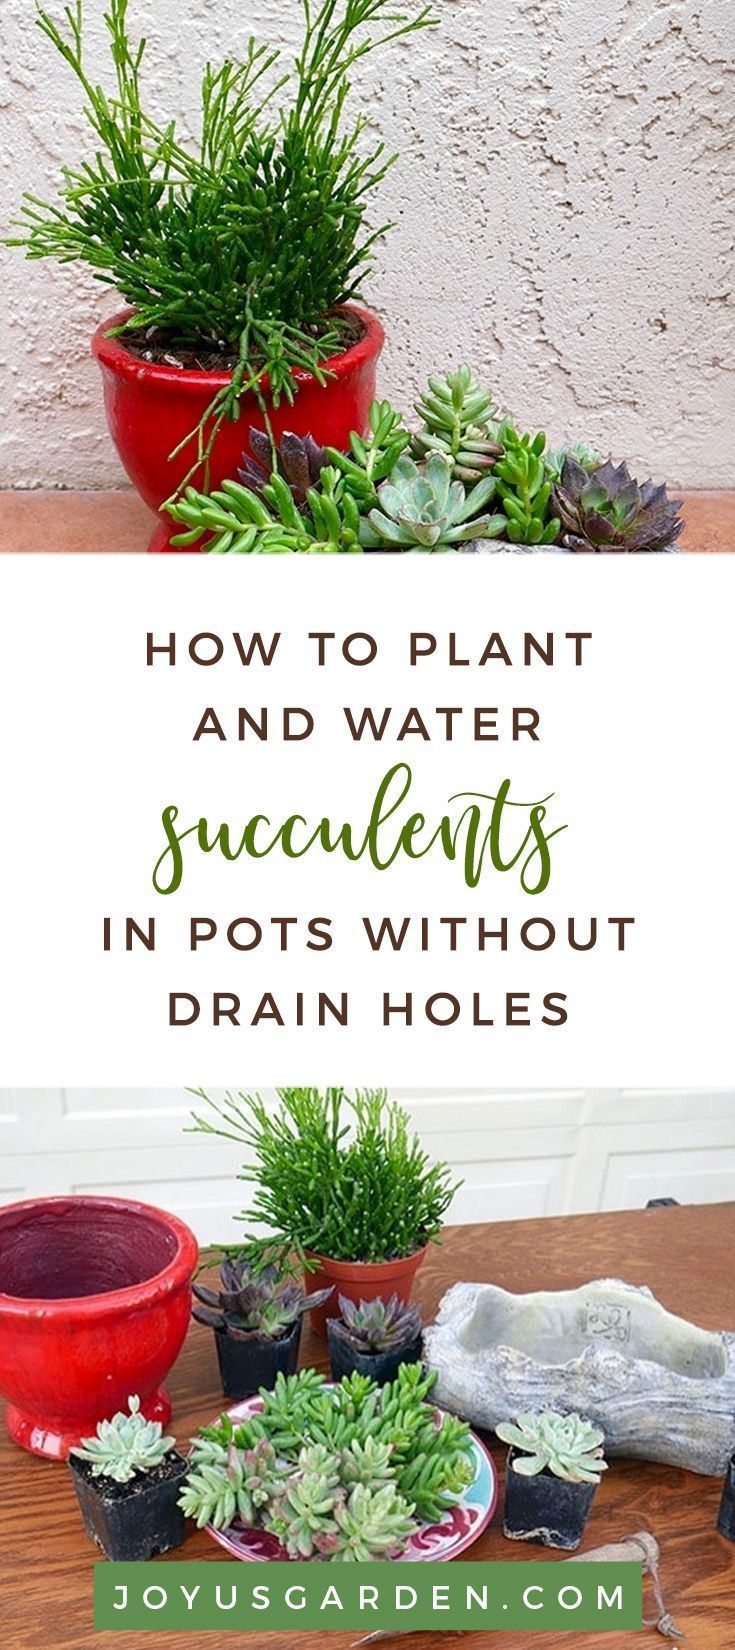 How to Plant & Water Succulents In Pots Without Drain Holes -   13 planting Decor succulents ideas